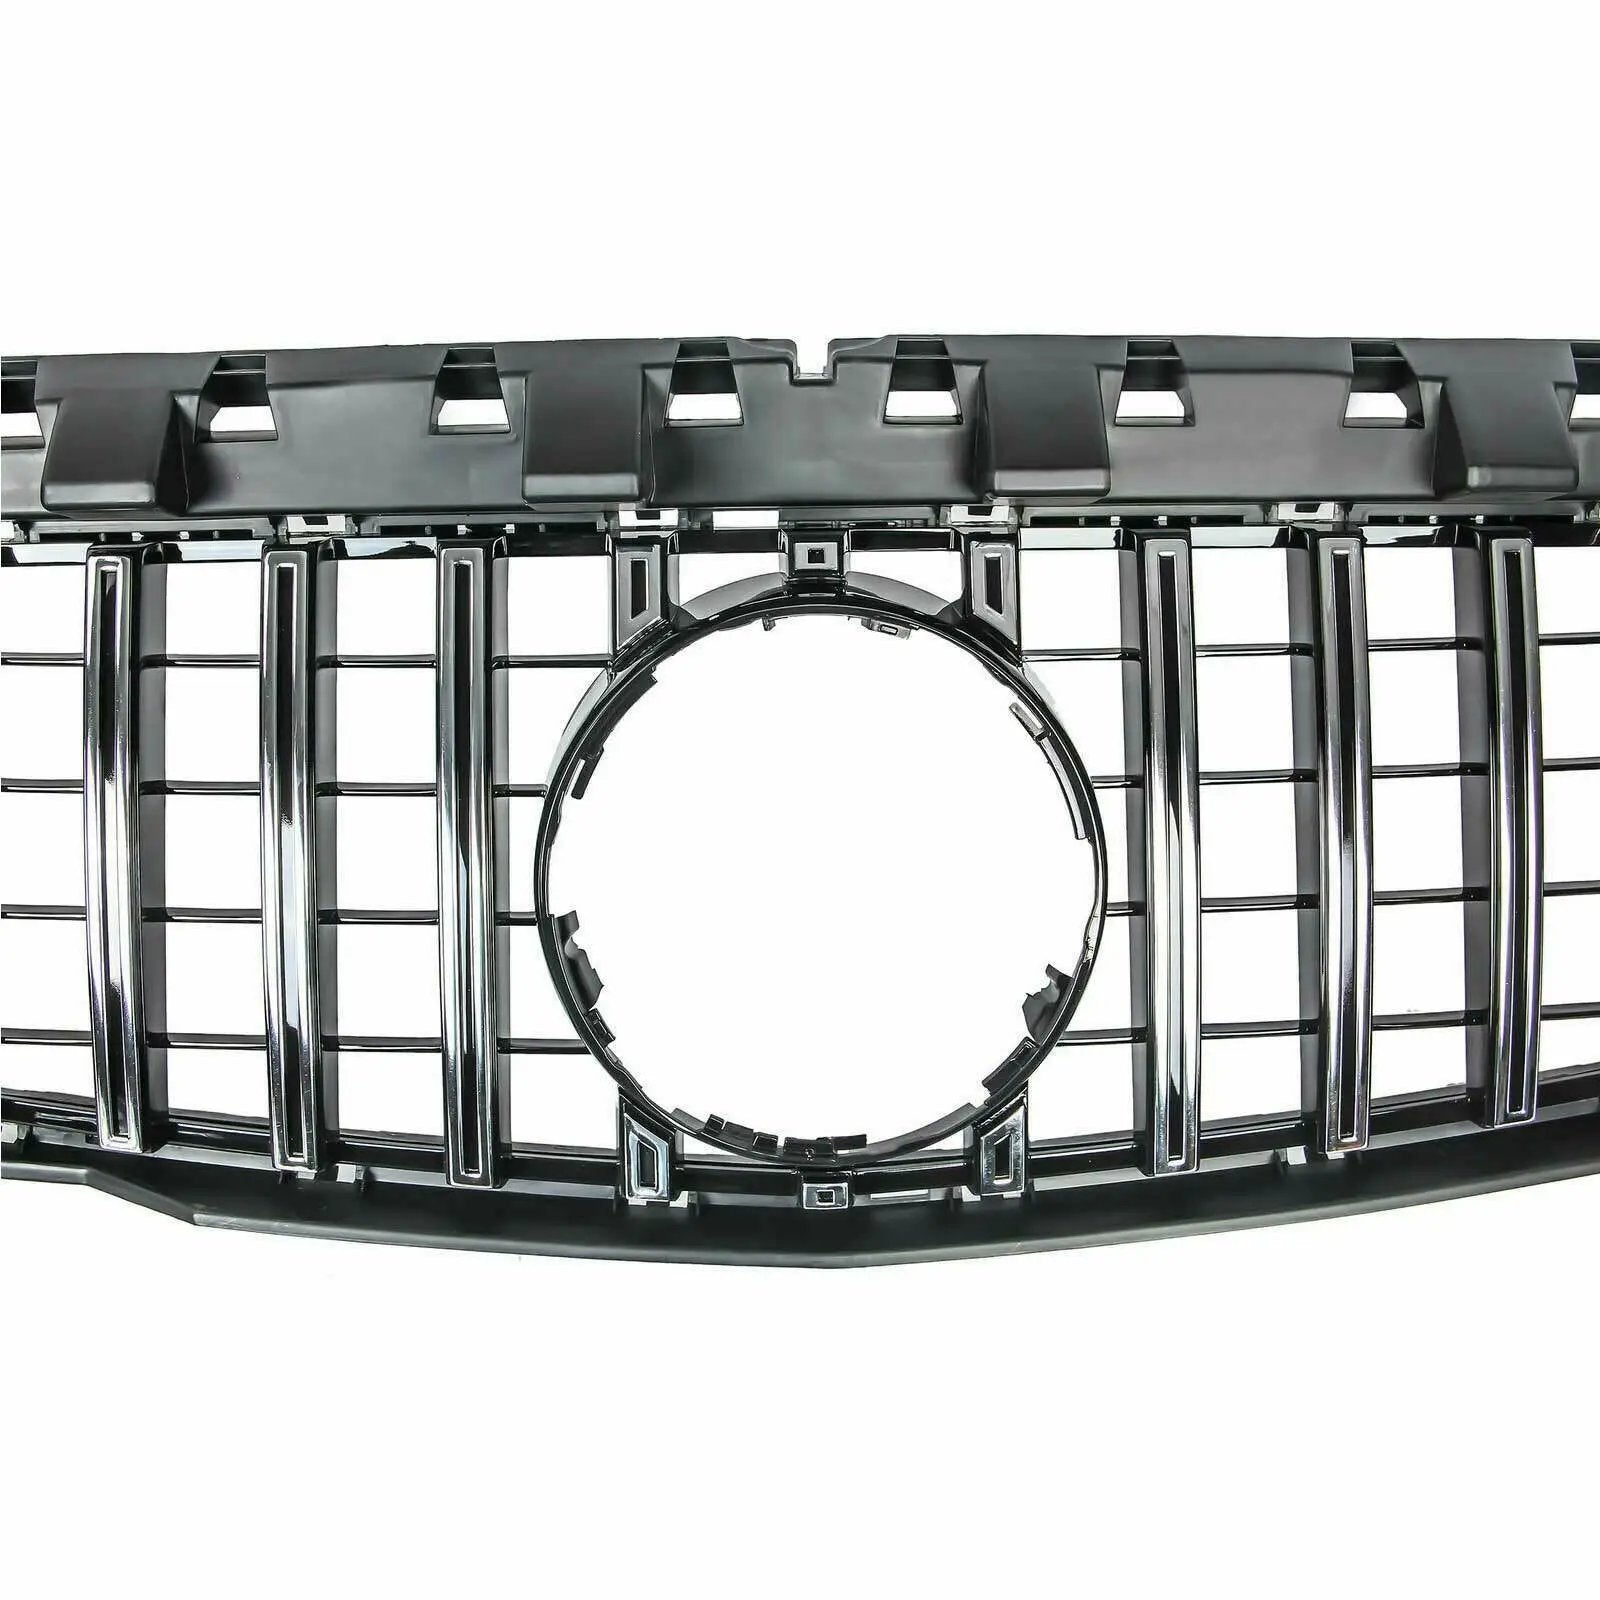 GT-R Chrome Front Grille for Mercedes Benz W117 CLA200 CLA250 13-16